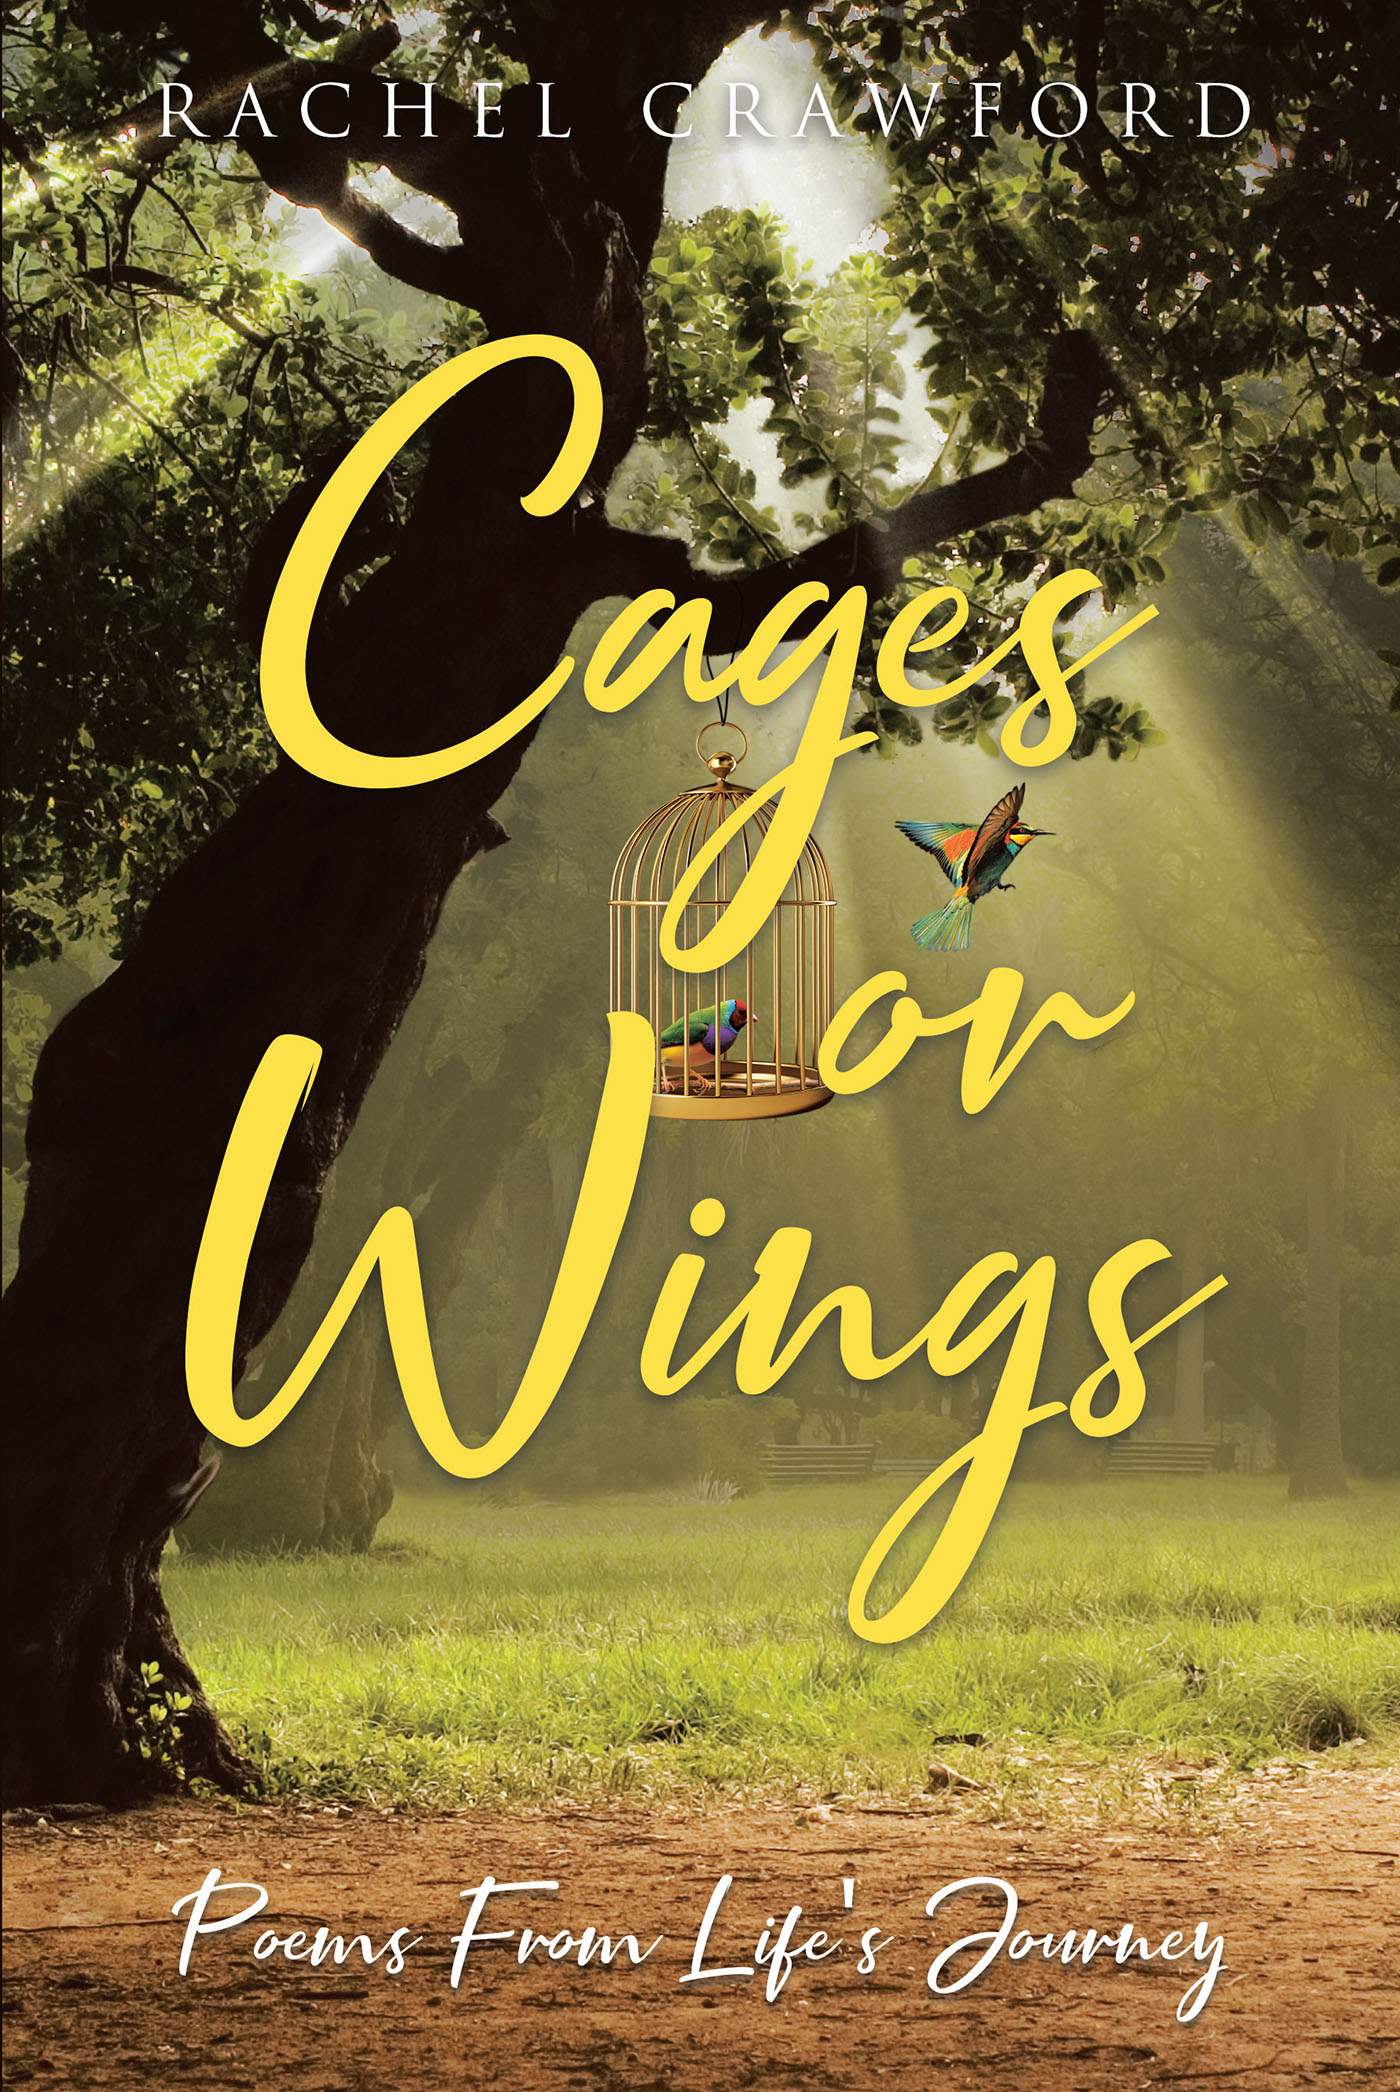 Cages or Wings, Poems from Life's Journey Cover Image